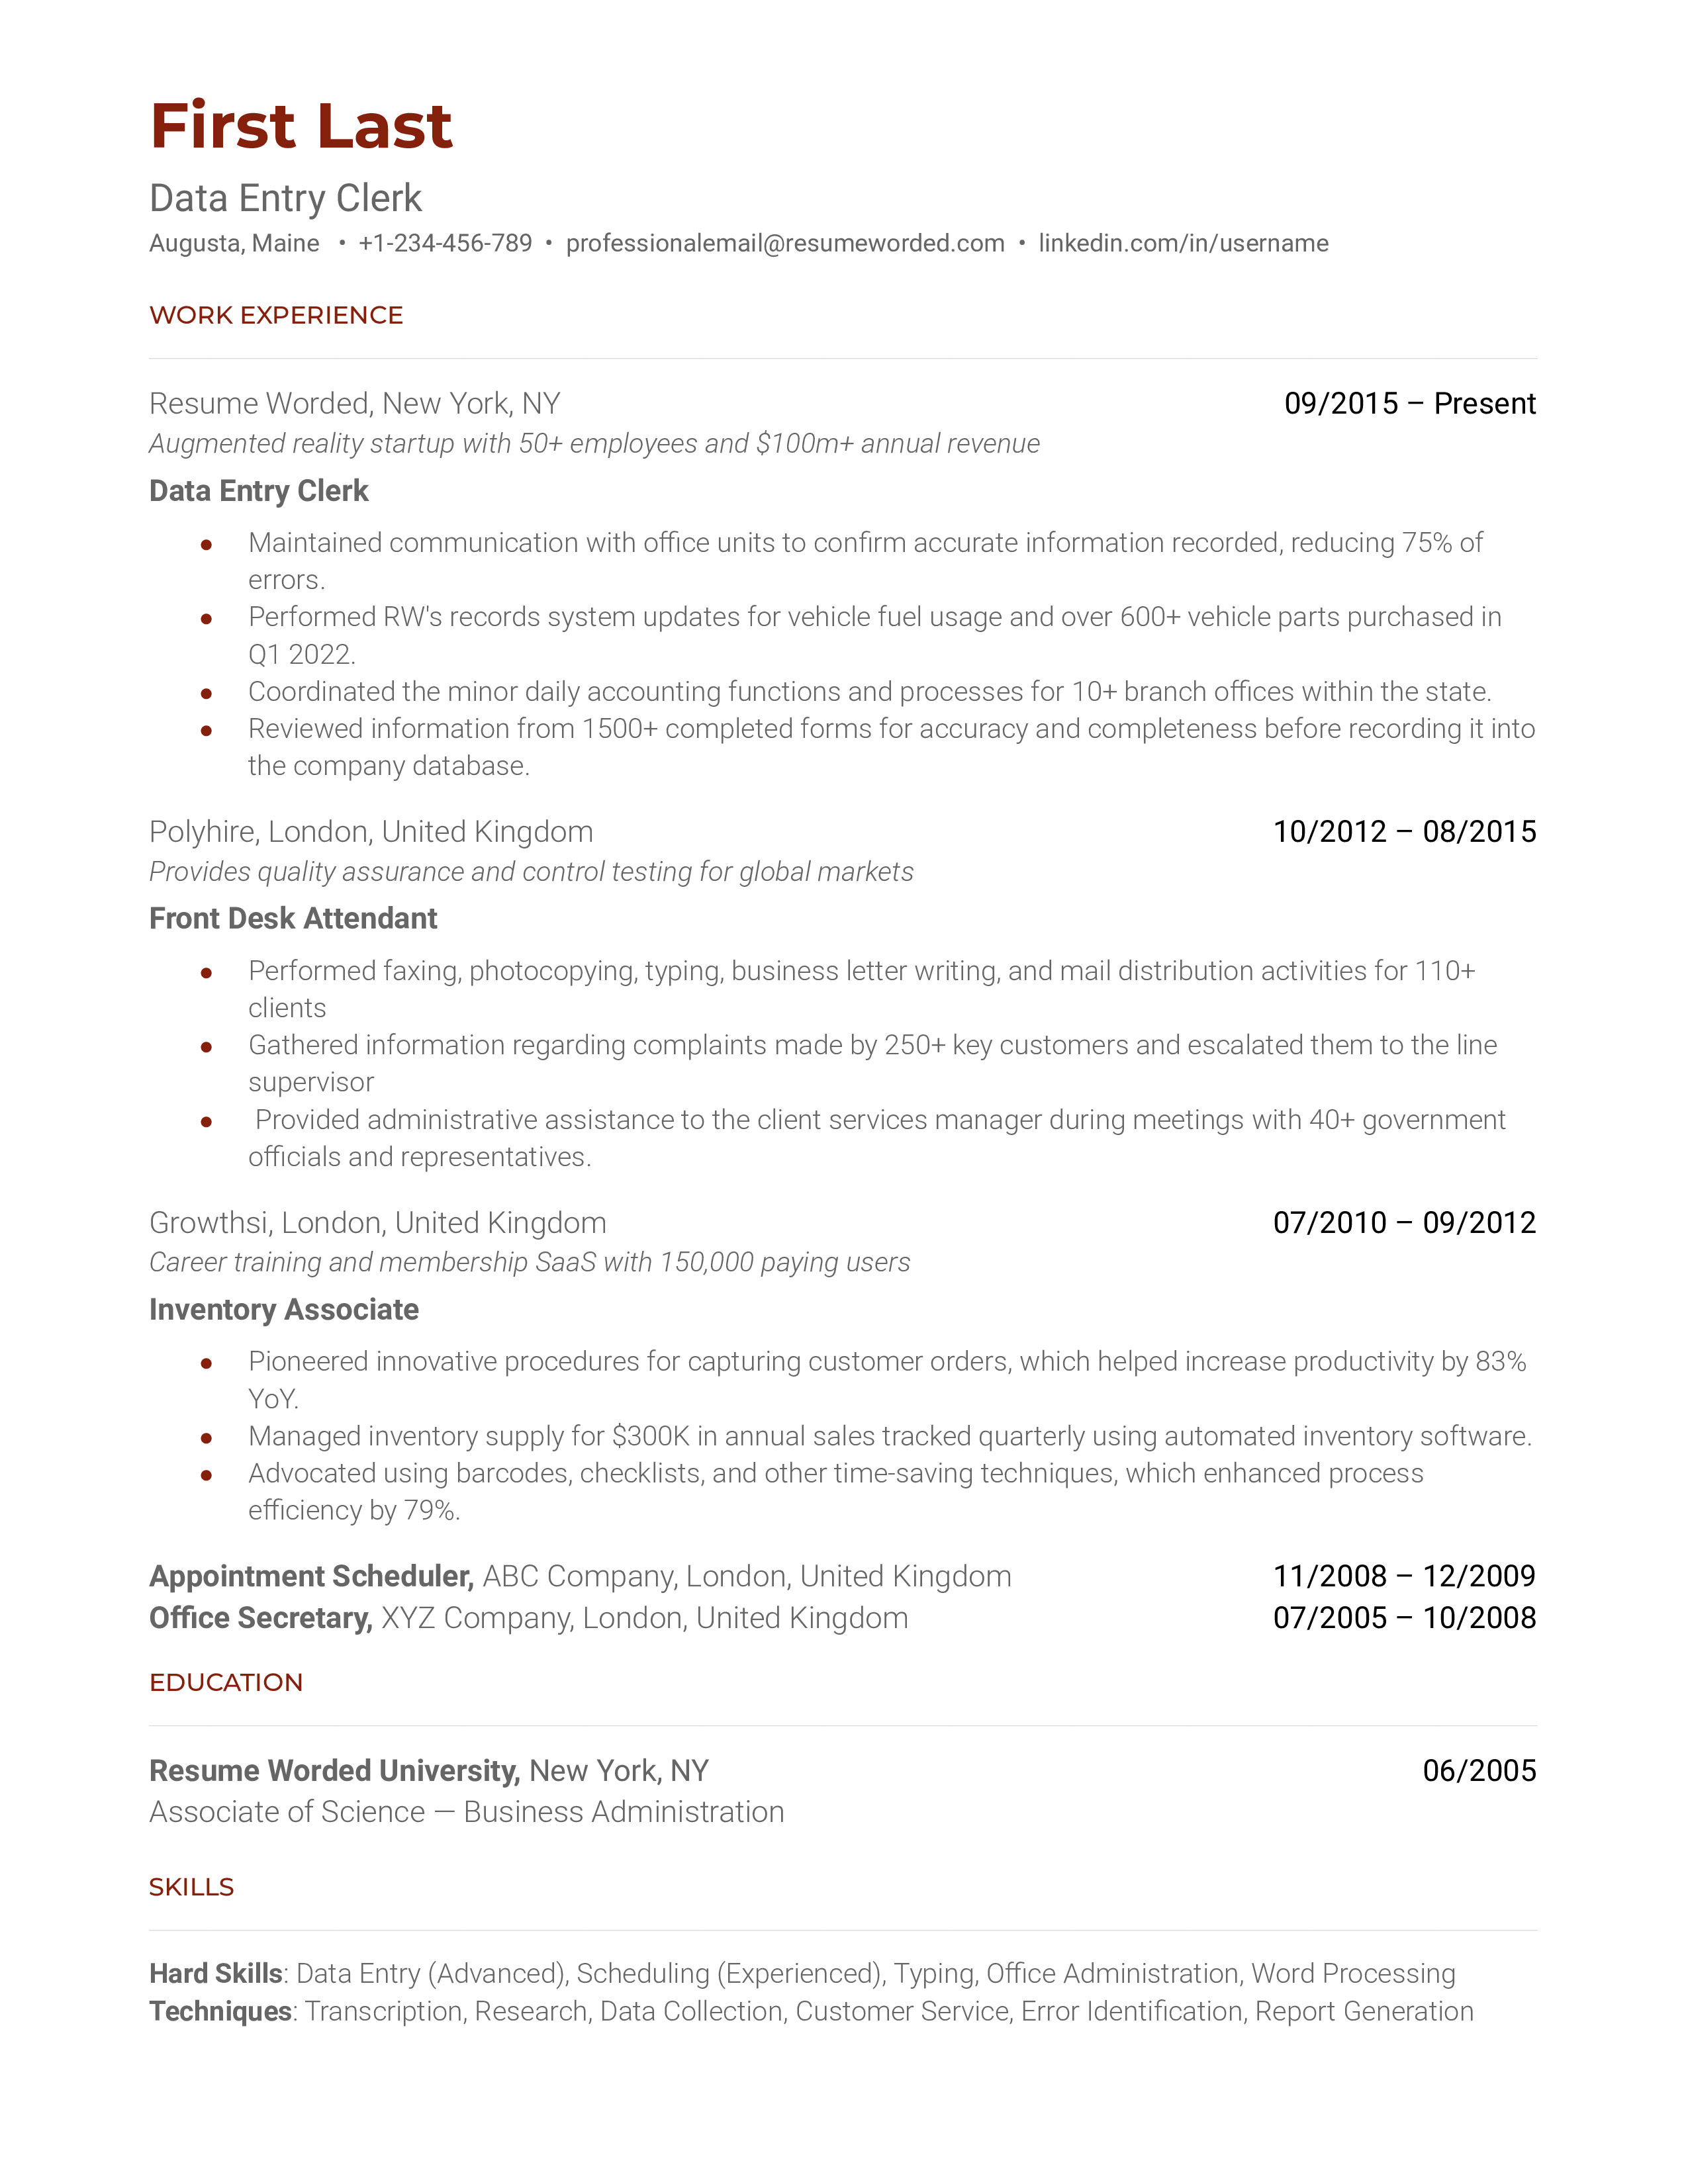 Data Entry Clerk resume showcasing software skills and accuracy